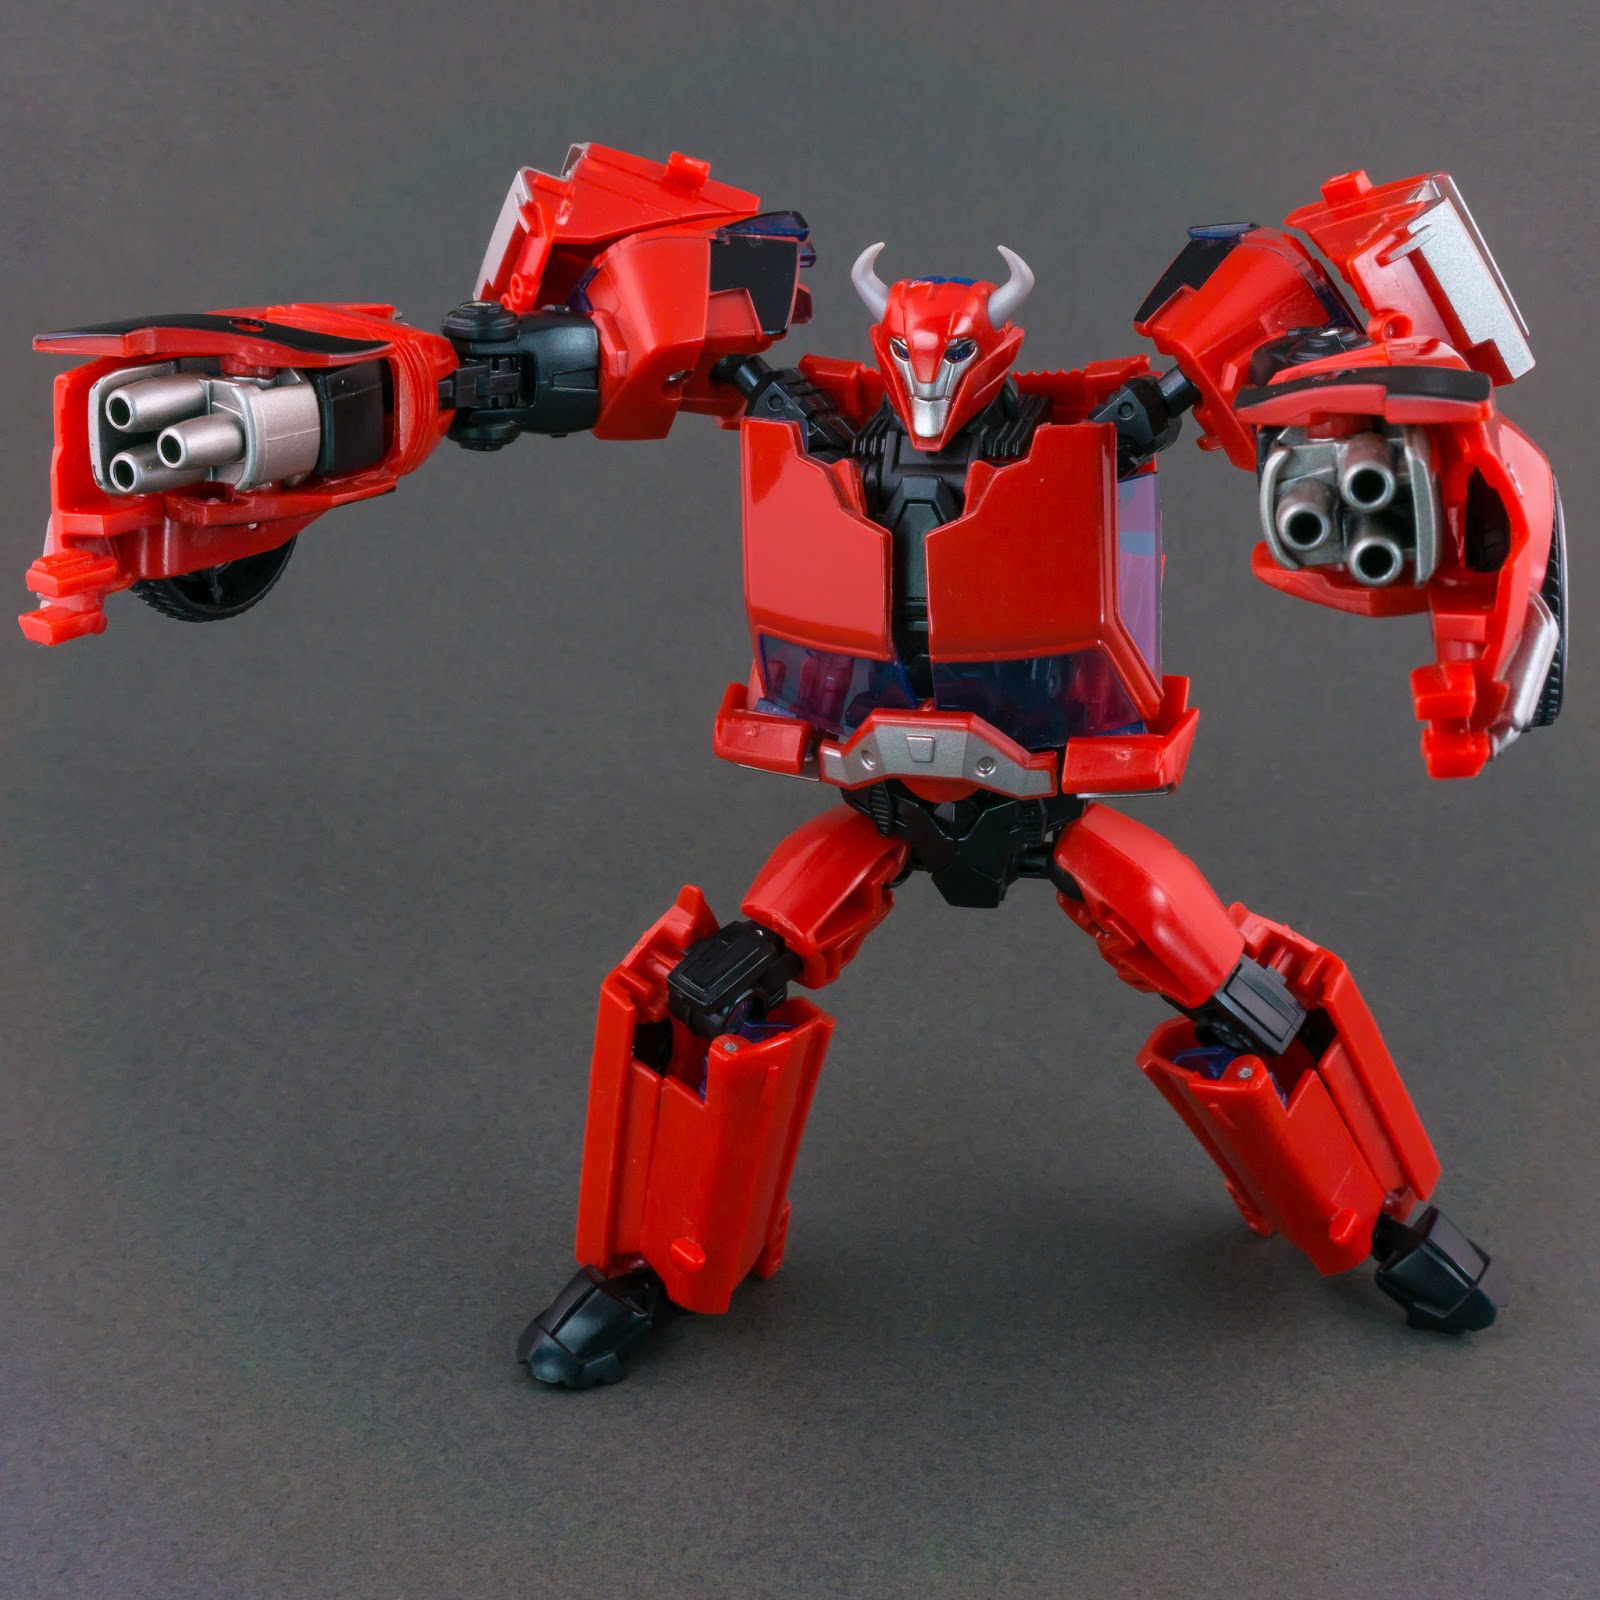 Transformers Prime Cliffjumper robot mode cannons deployed